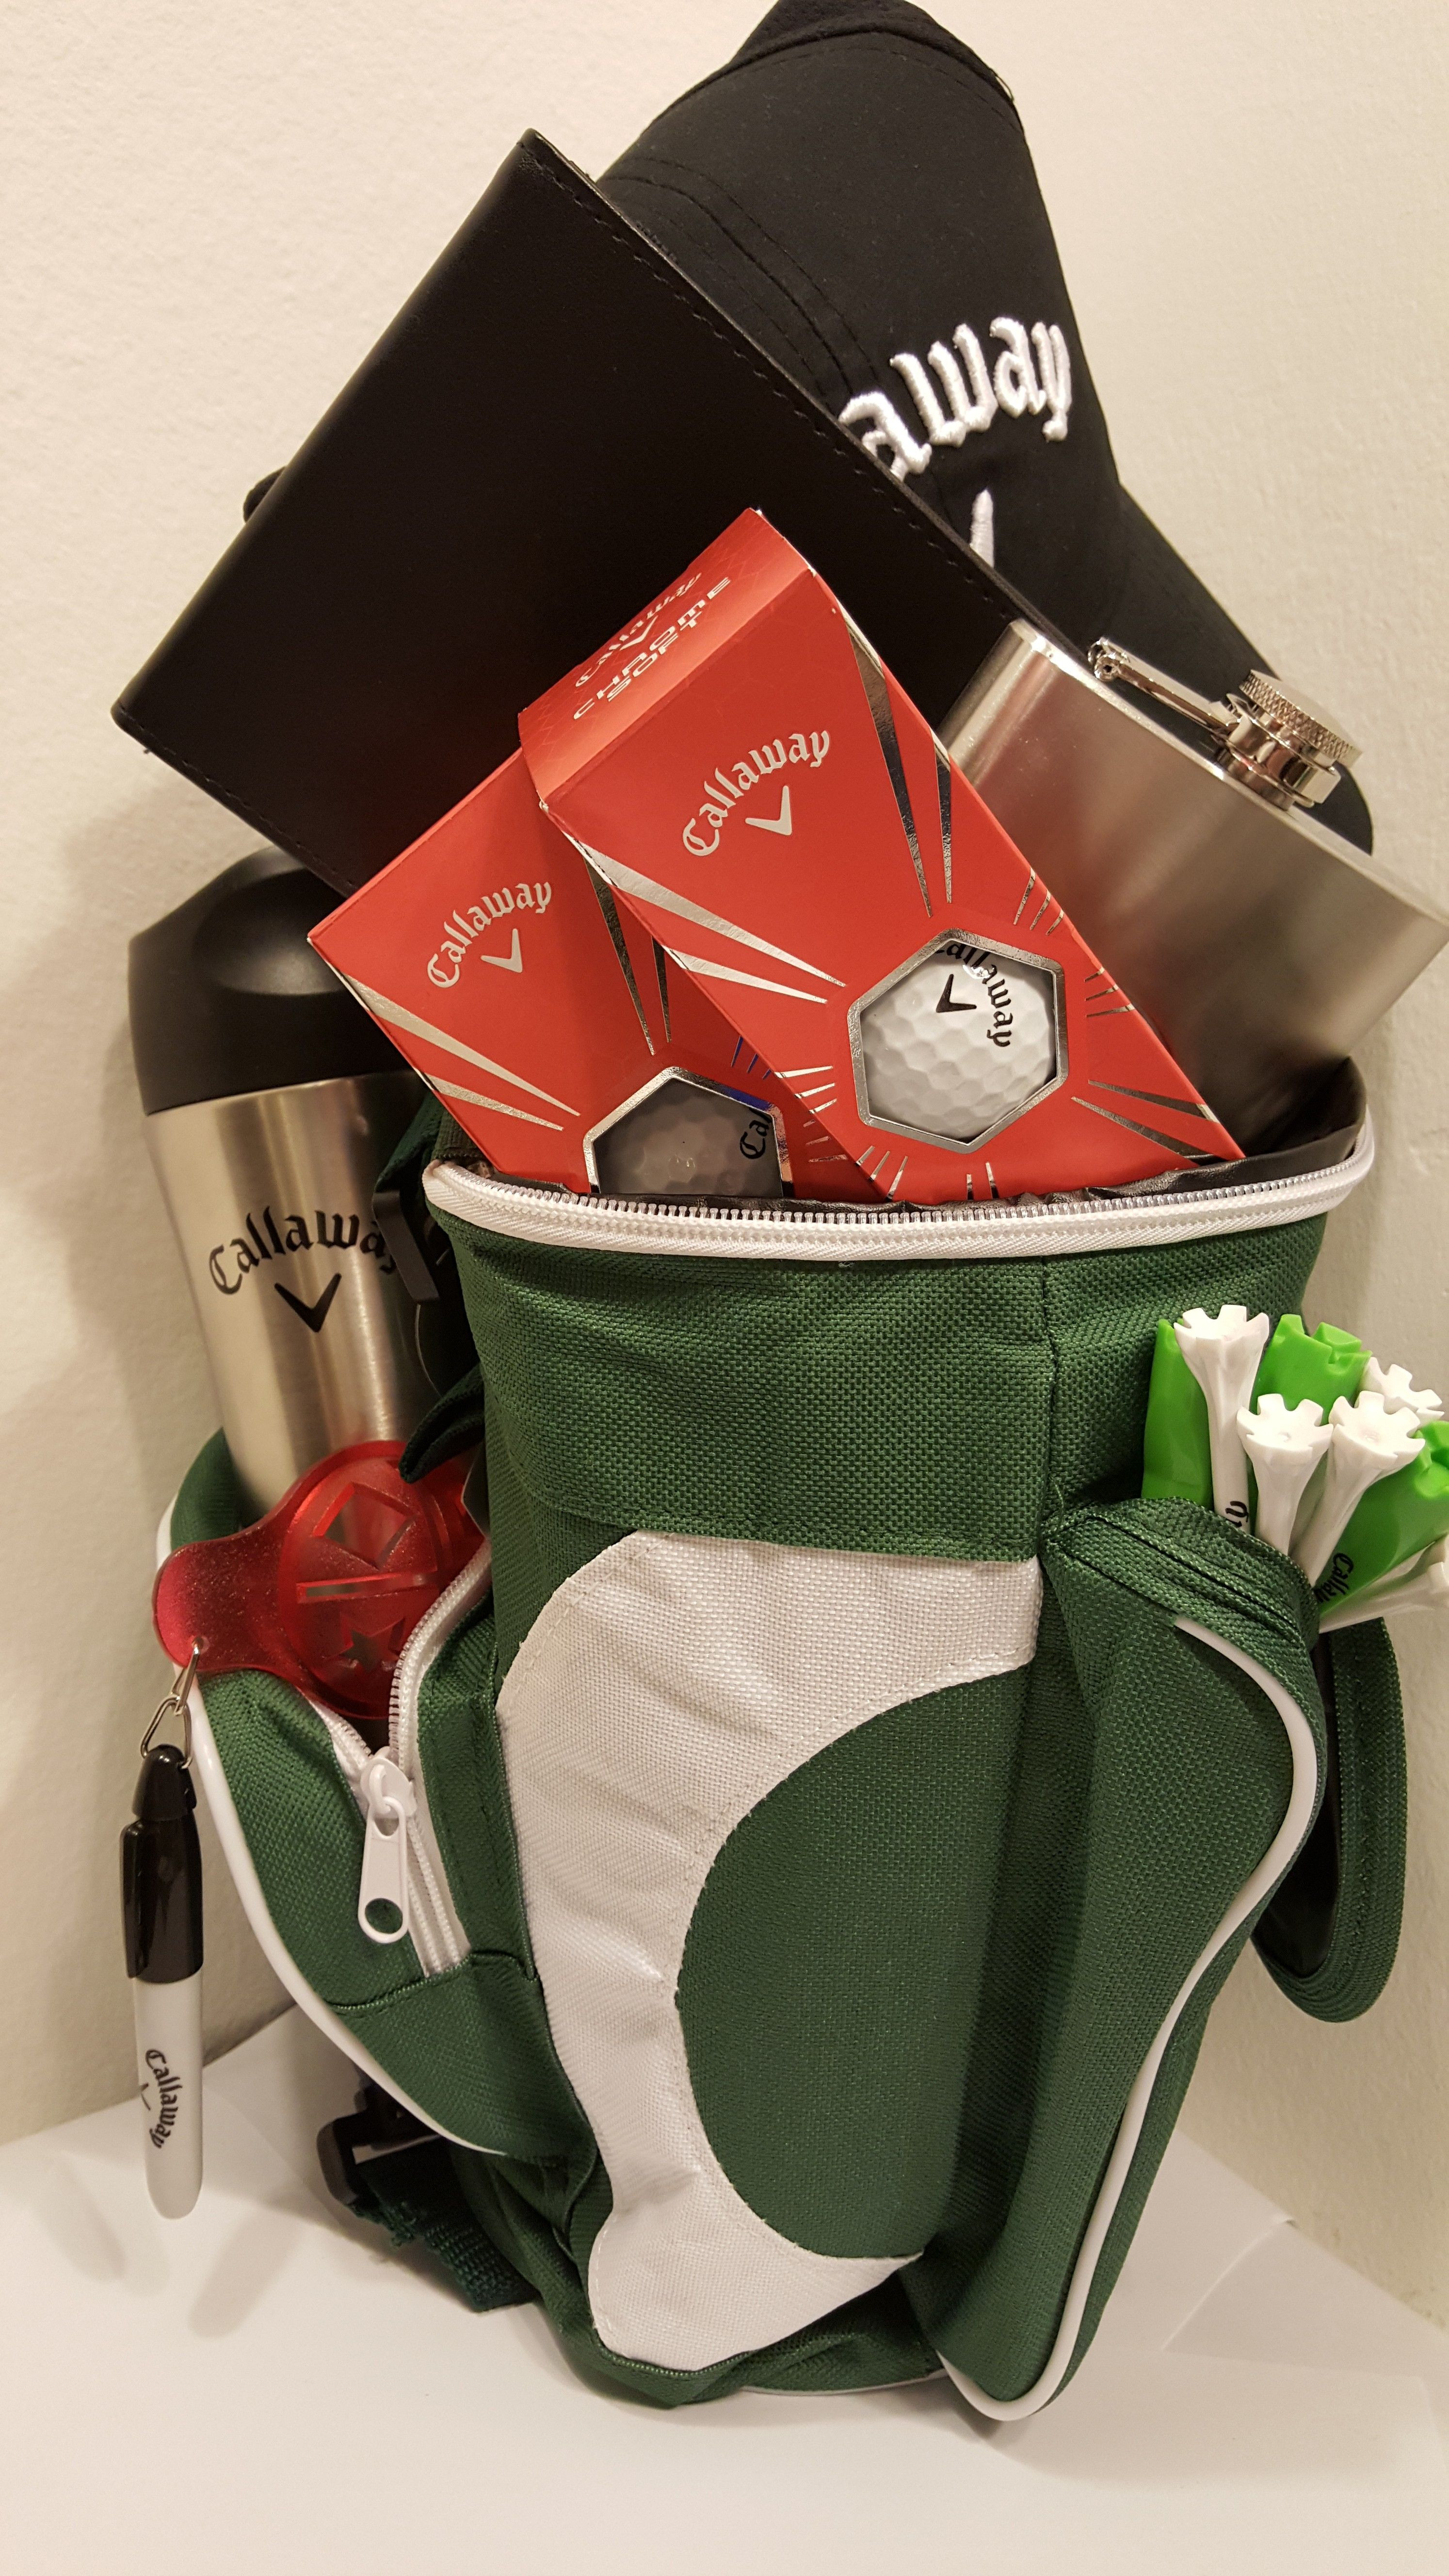 Best ideas about Golf Gift Ideas
. Save or Pin Premium Golf Gift Bag from GolferGiftBaskets Now.